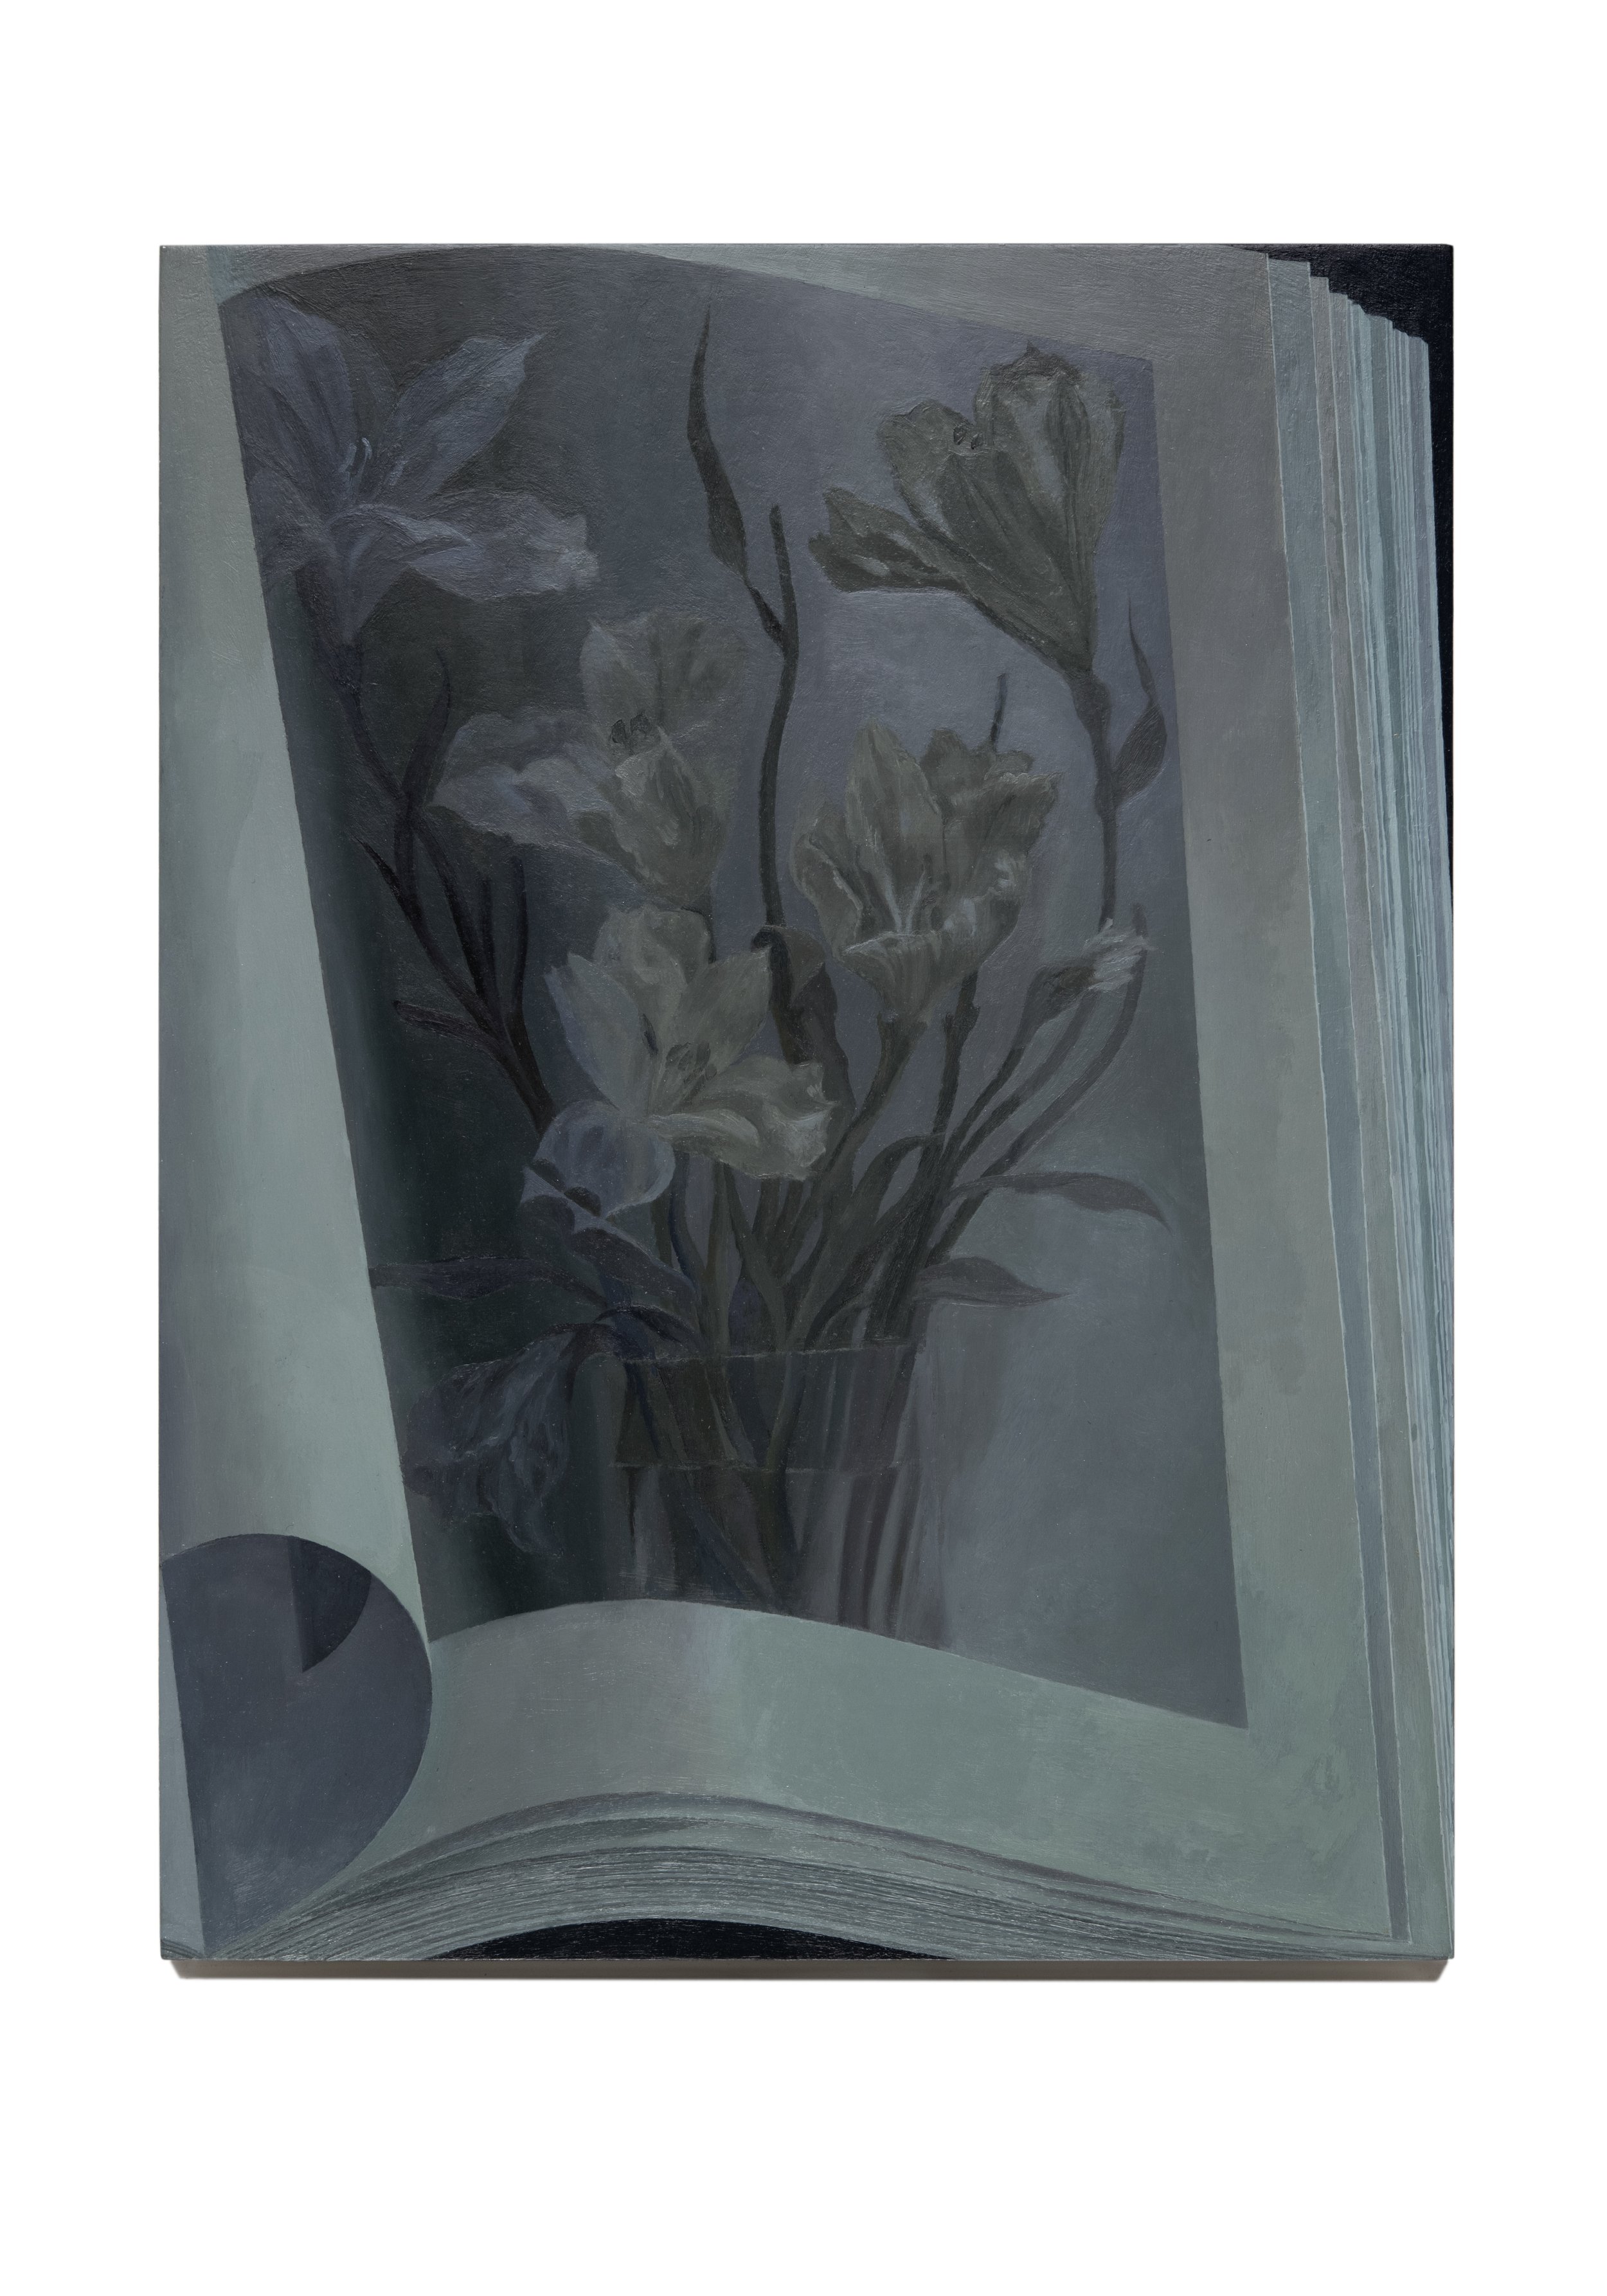   Untitled (January flowers)  12 x 9 inches oil on panel 2021  Photograph by Constance Mensch. Courtesy of WORKPLACE Gallery, London, U.K. 